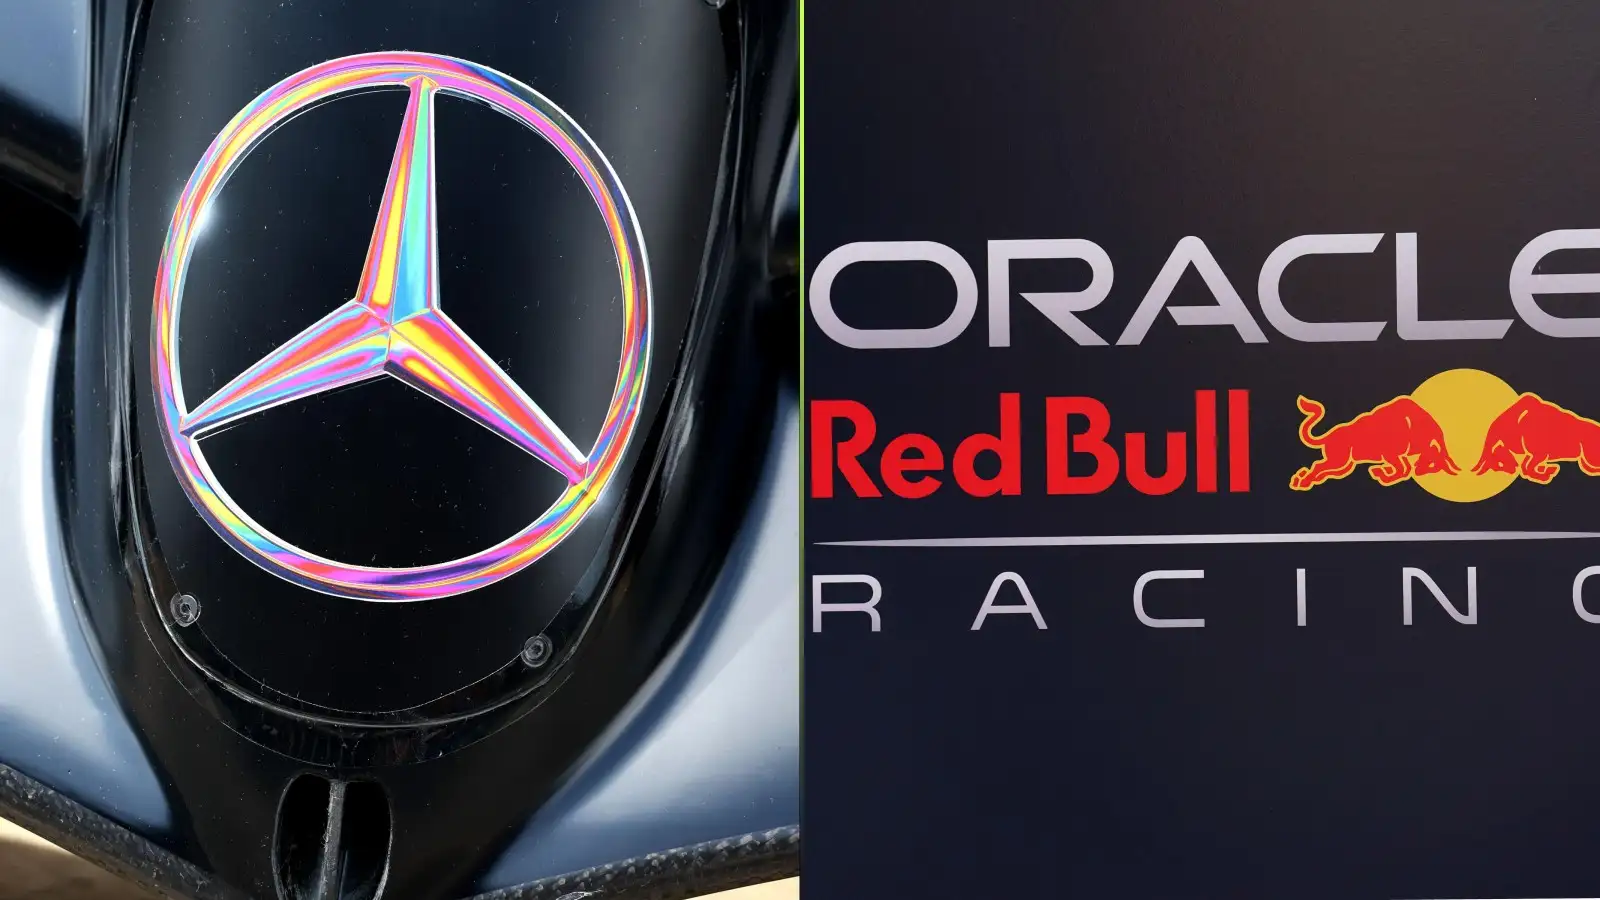 The Mercedes and Red Bull badges side by side